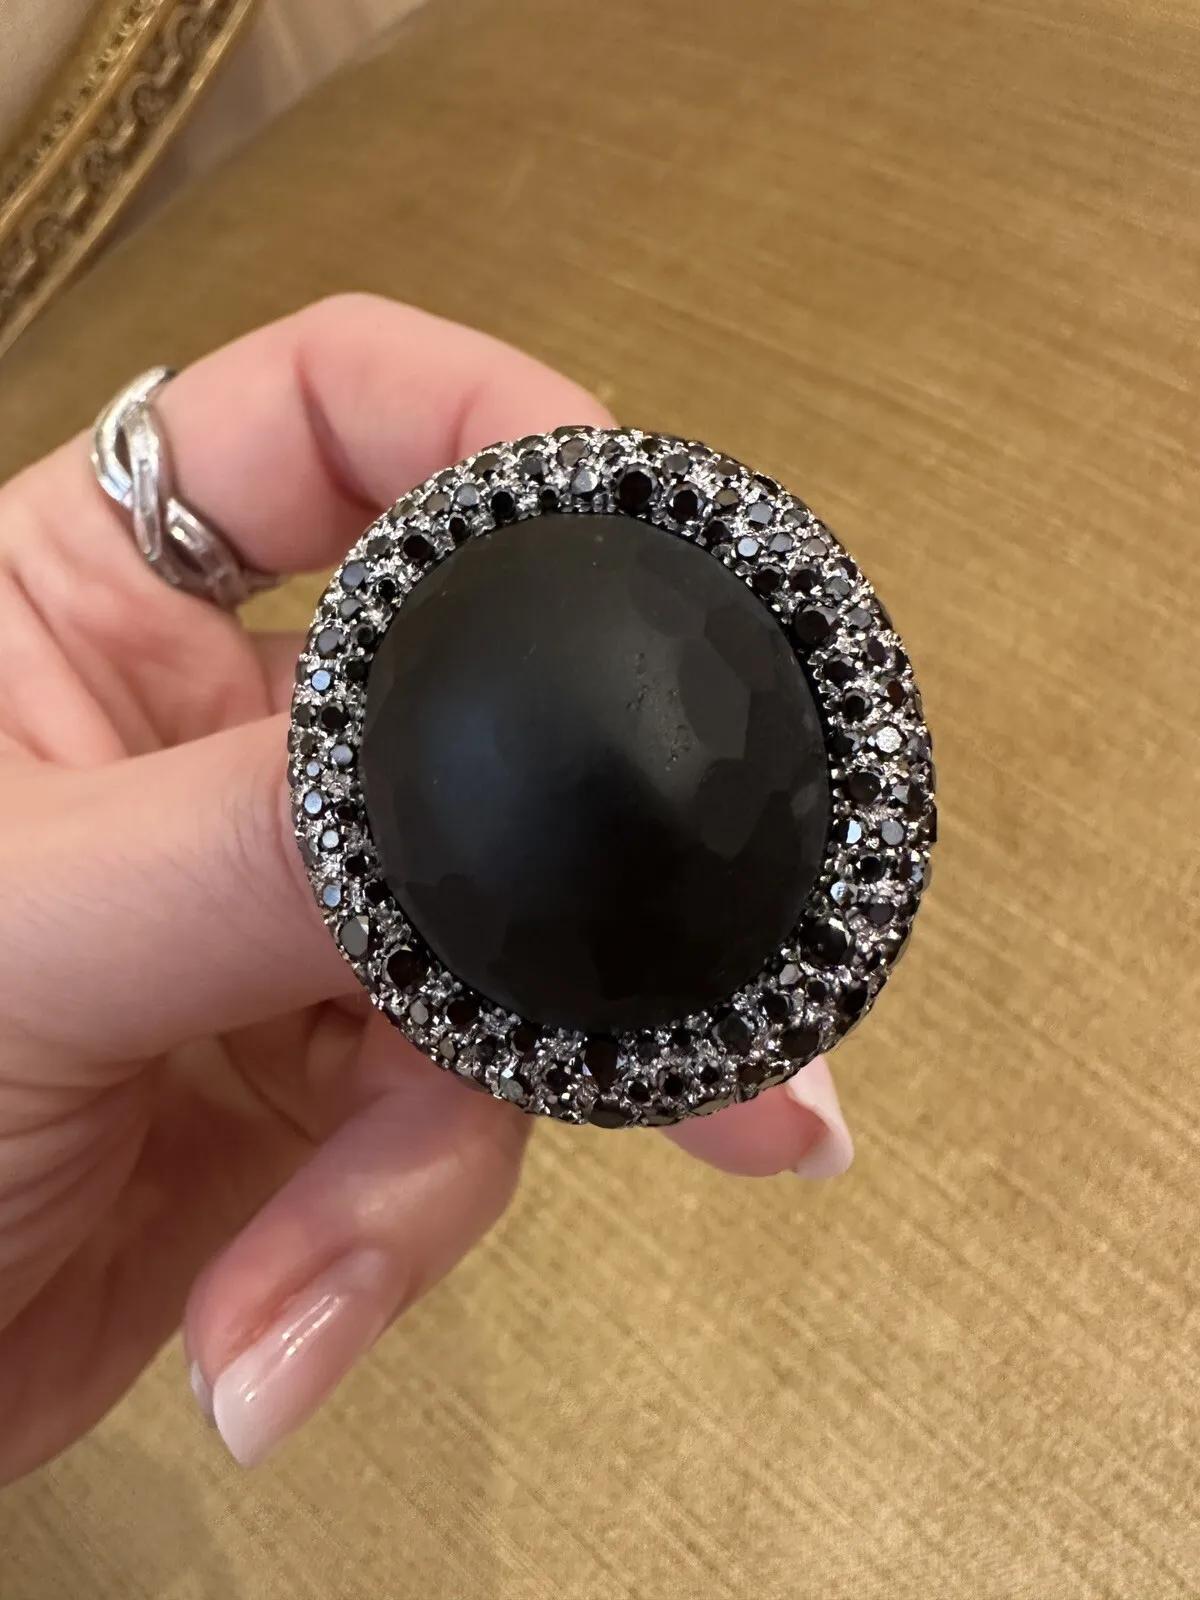 Black Diamond and Obsidian Statement Ring in 18k White Gold

Large Obsidian and Black Diamond Ring features a large Oval Matte Black Obsidian surrounded by Round Black Diamonds Pavé set in 18k White Gold.

The Obsidian weighs 48.80 carats, has a